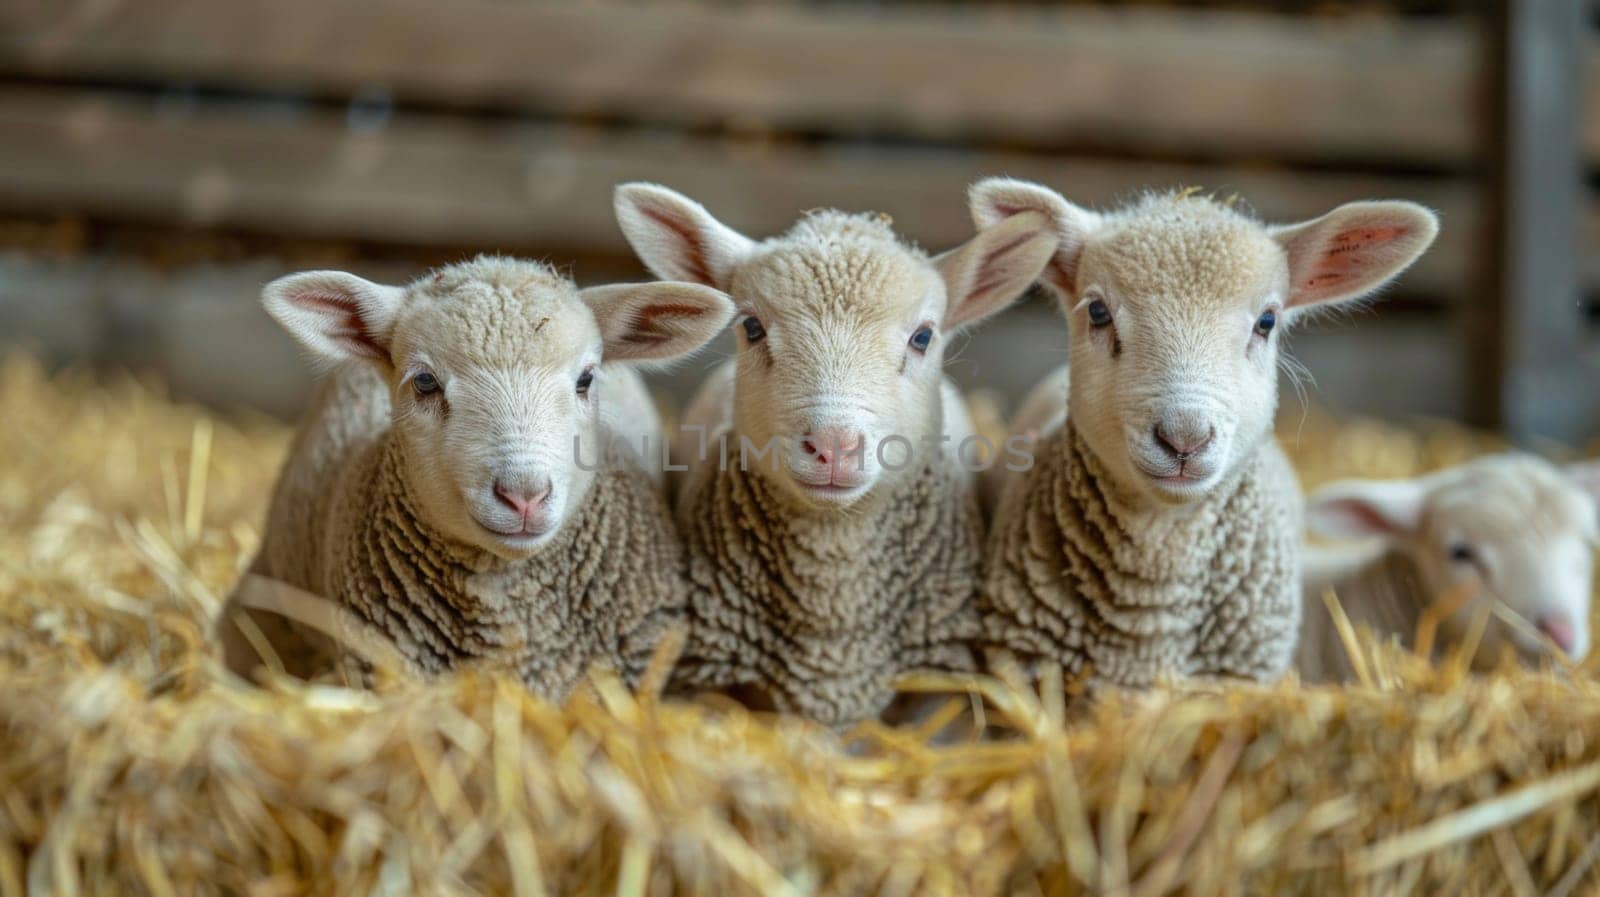 A group of three sheep are standing in a pile of hay